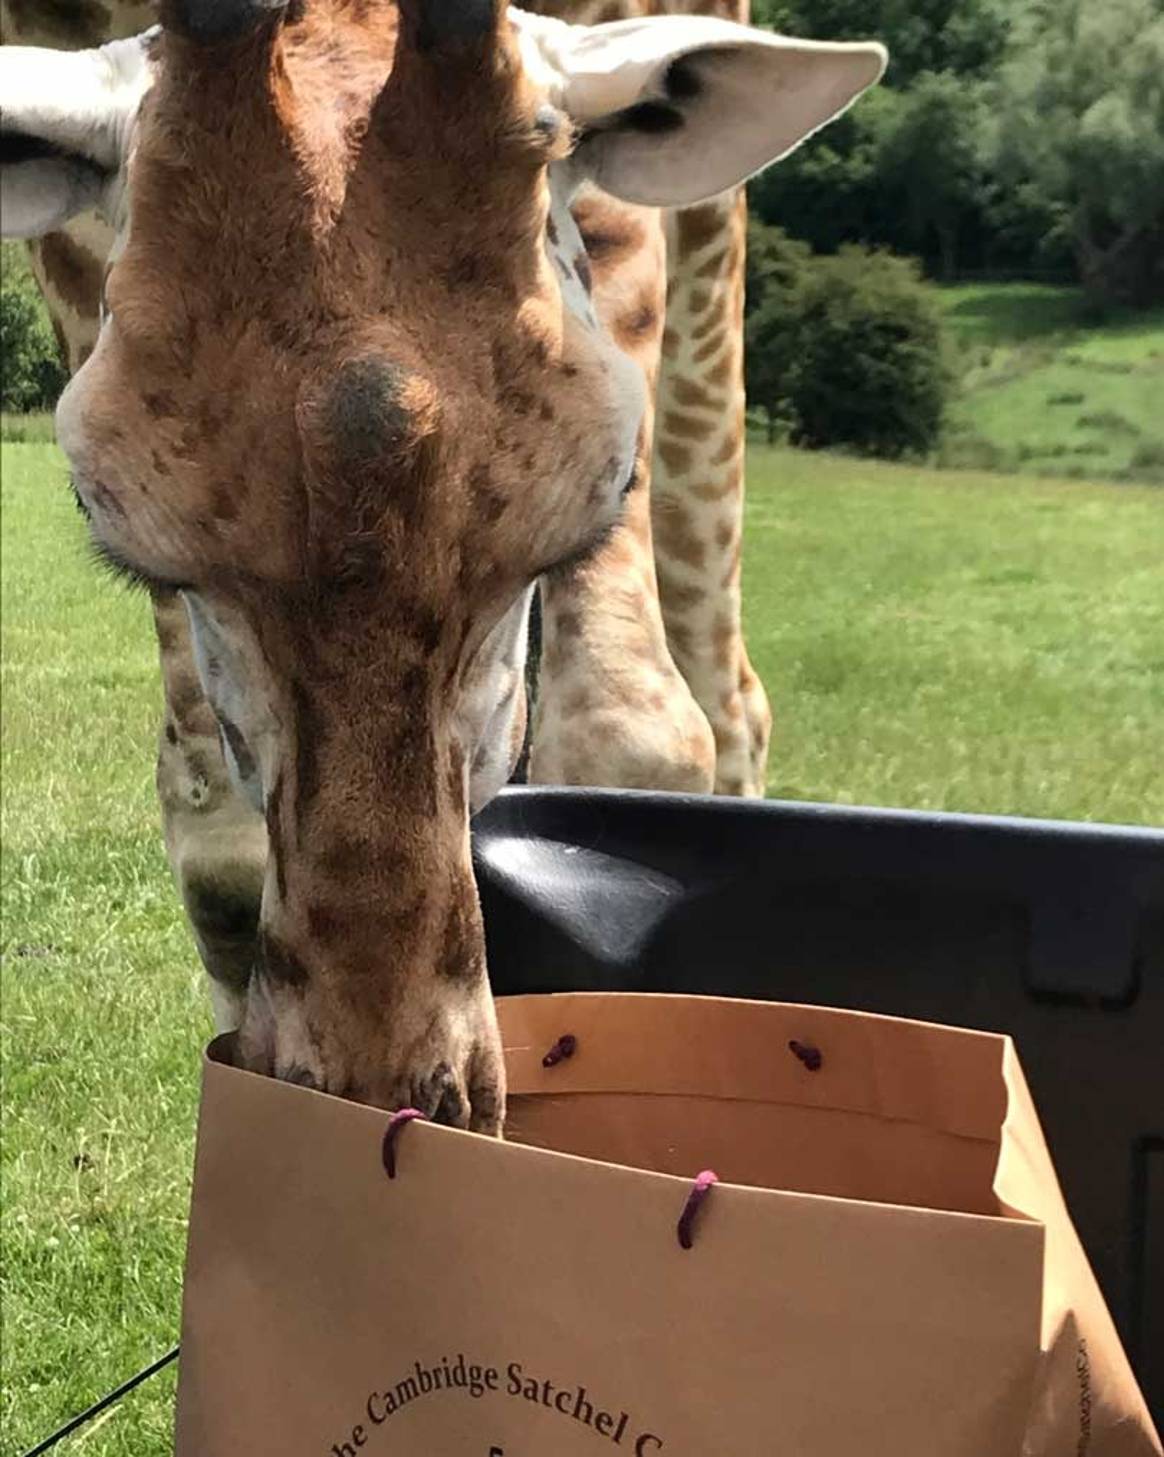 In Pictures: Cambridge Satchel Company giraffe collection